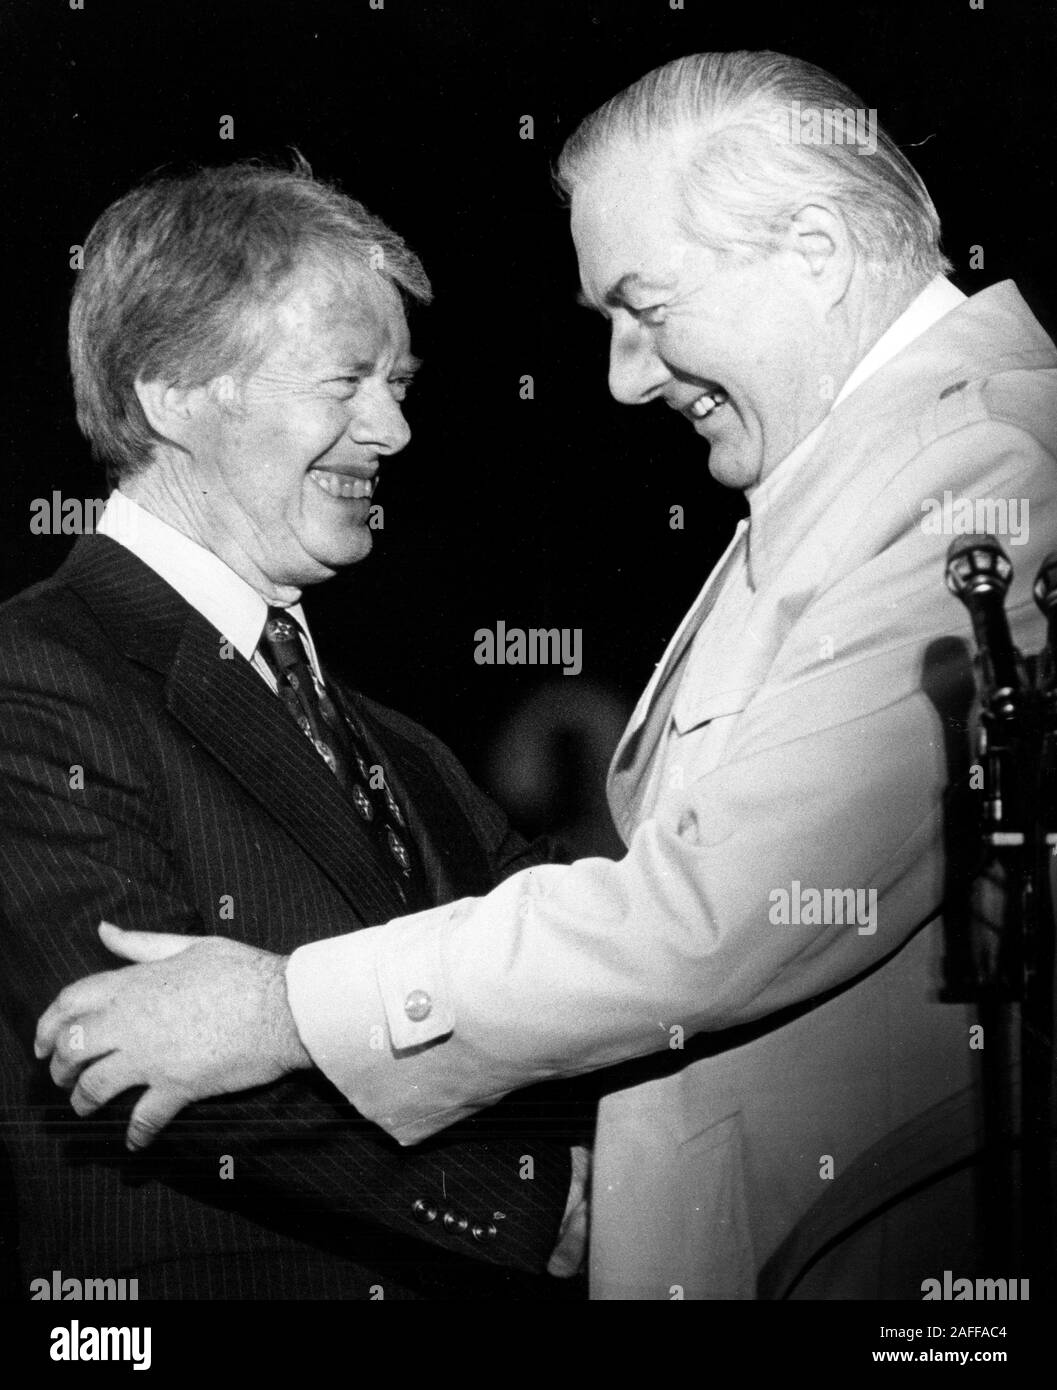 Late 70's - UK Prime Minister JAMES CALLAGHAN smiles and shakes hands with US President JIMMY CARTER. Date and place unknown. (Credit Image: © Keystone Press Agency/Keystone USA via ZUMAPRESS.com) Stock Photo